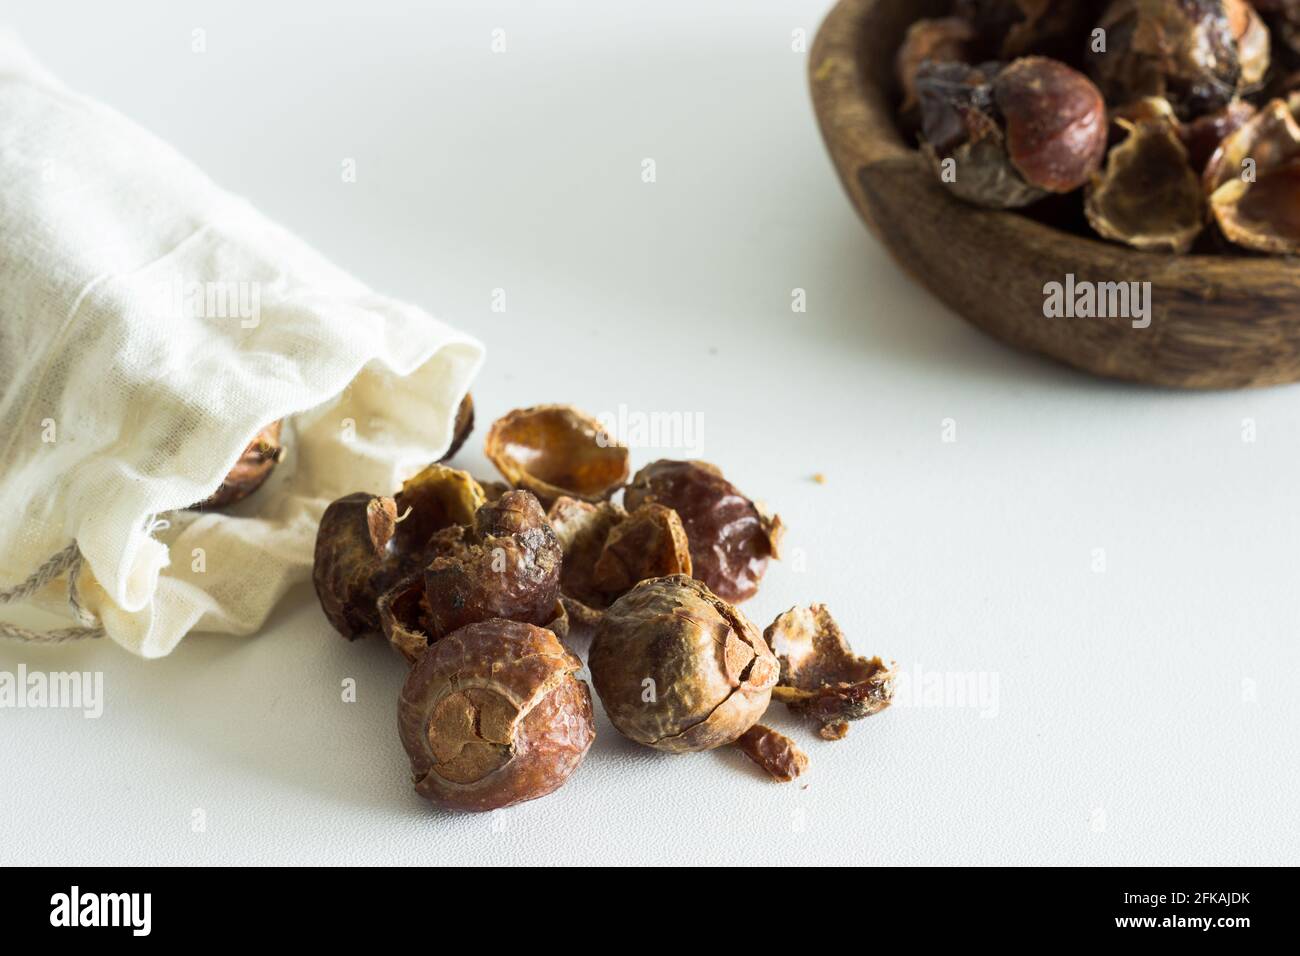 Soap nuts falling out of linen bag on white background; organic laundry detergent; eco-friendly Stock Photo